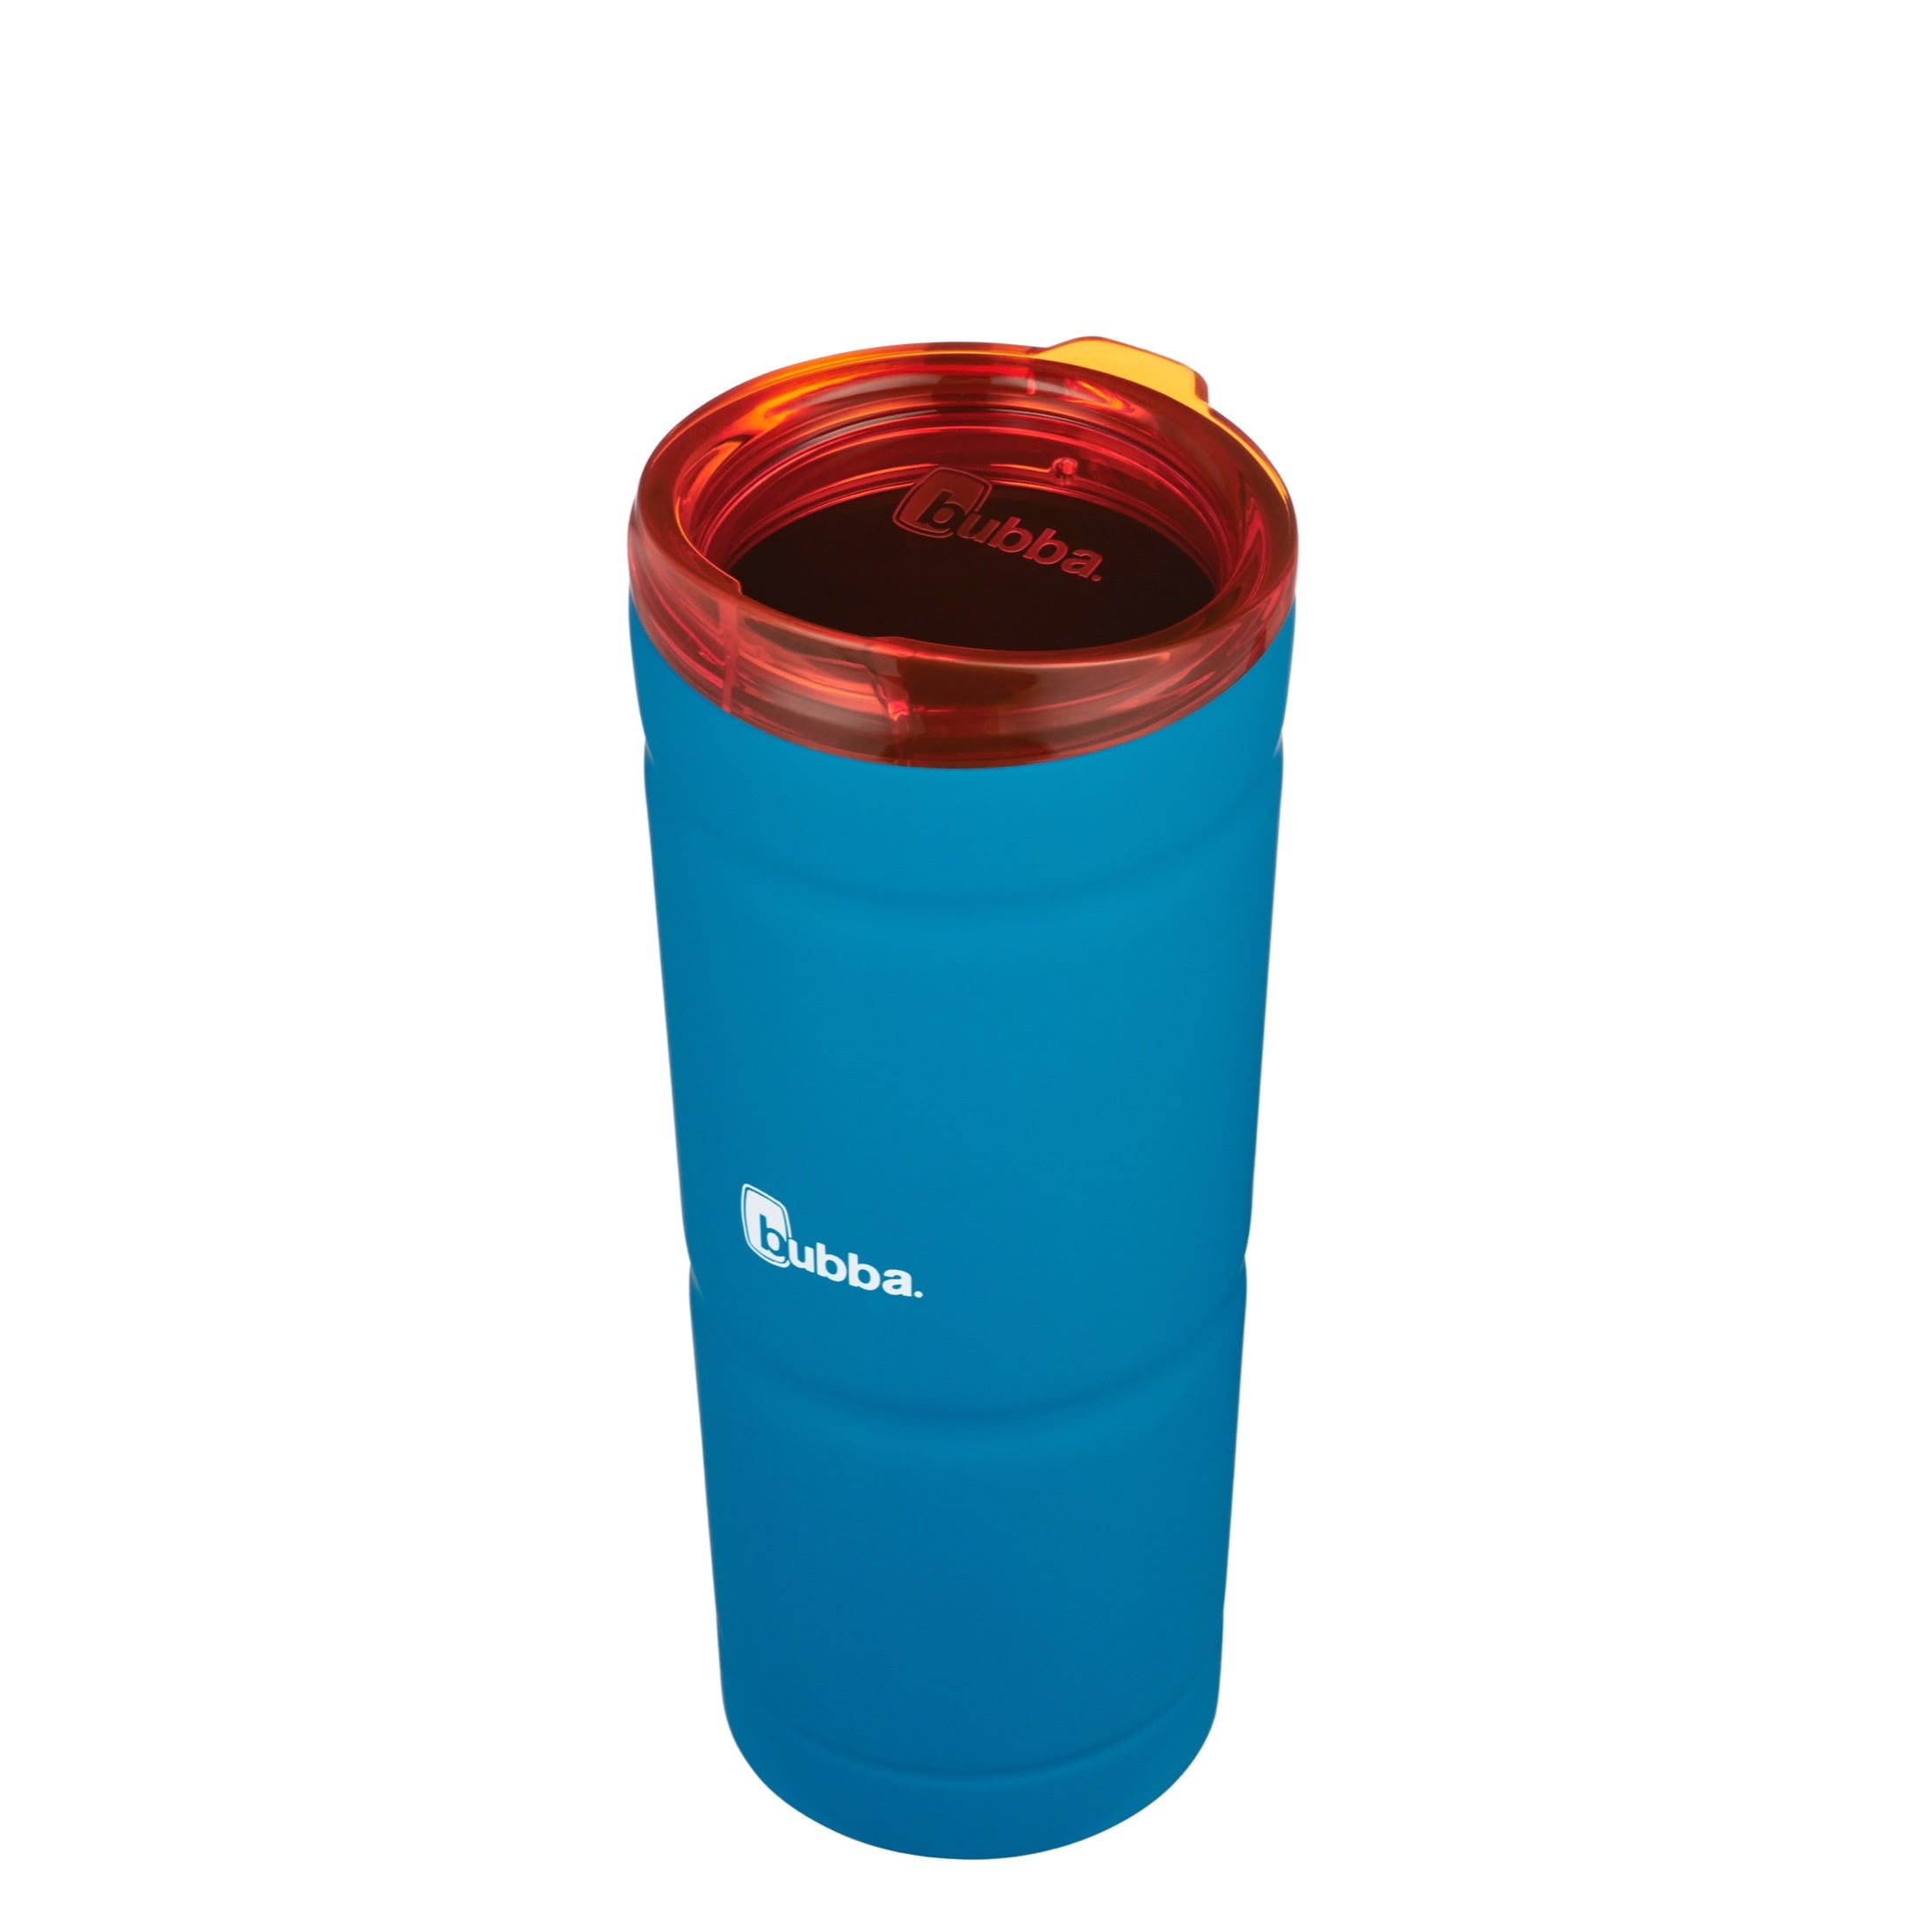 Bubba Insulated 48 oz. Tumbler w/ Handle Red & Blue Abstract Lid and Straw  as is